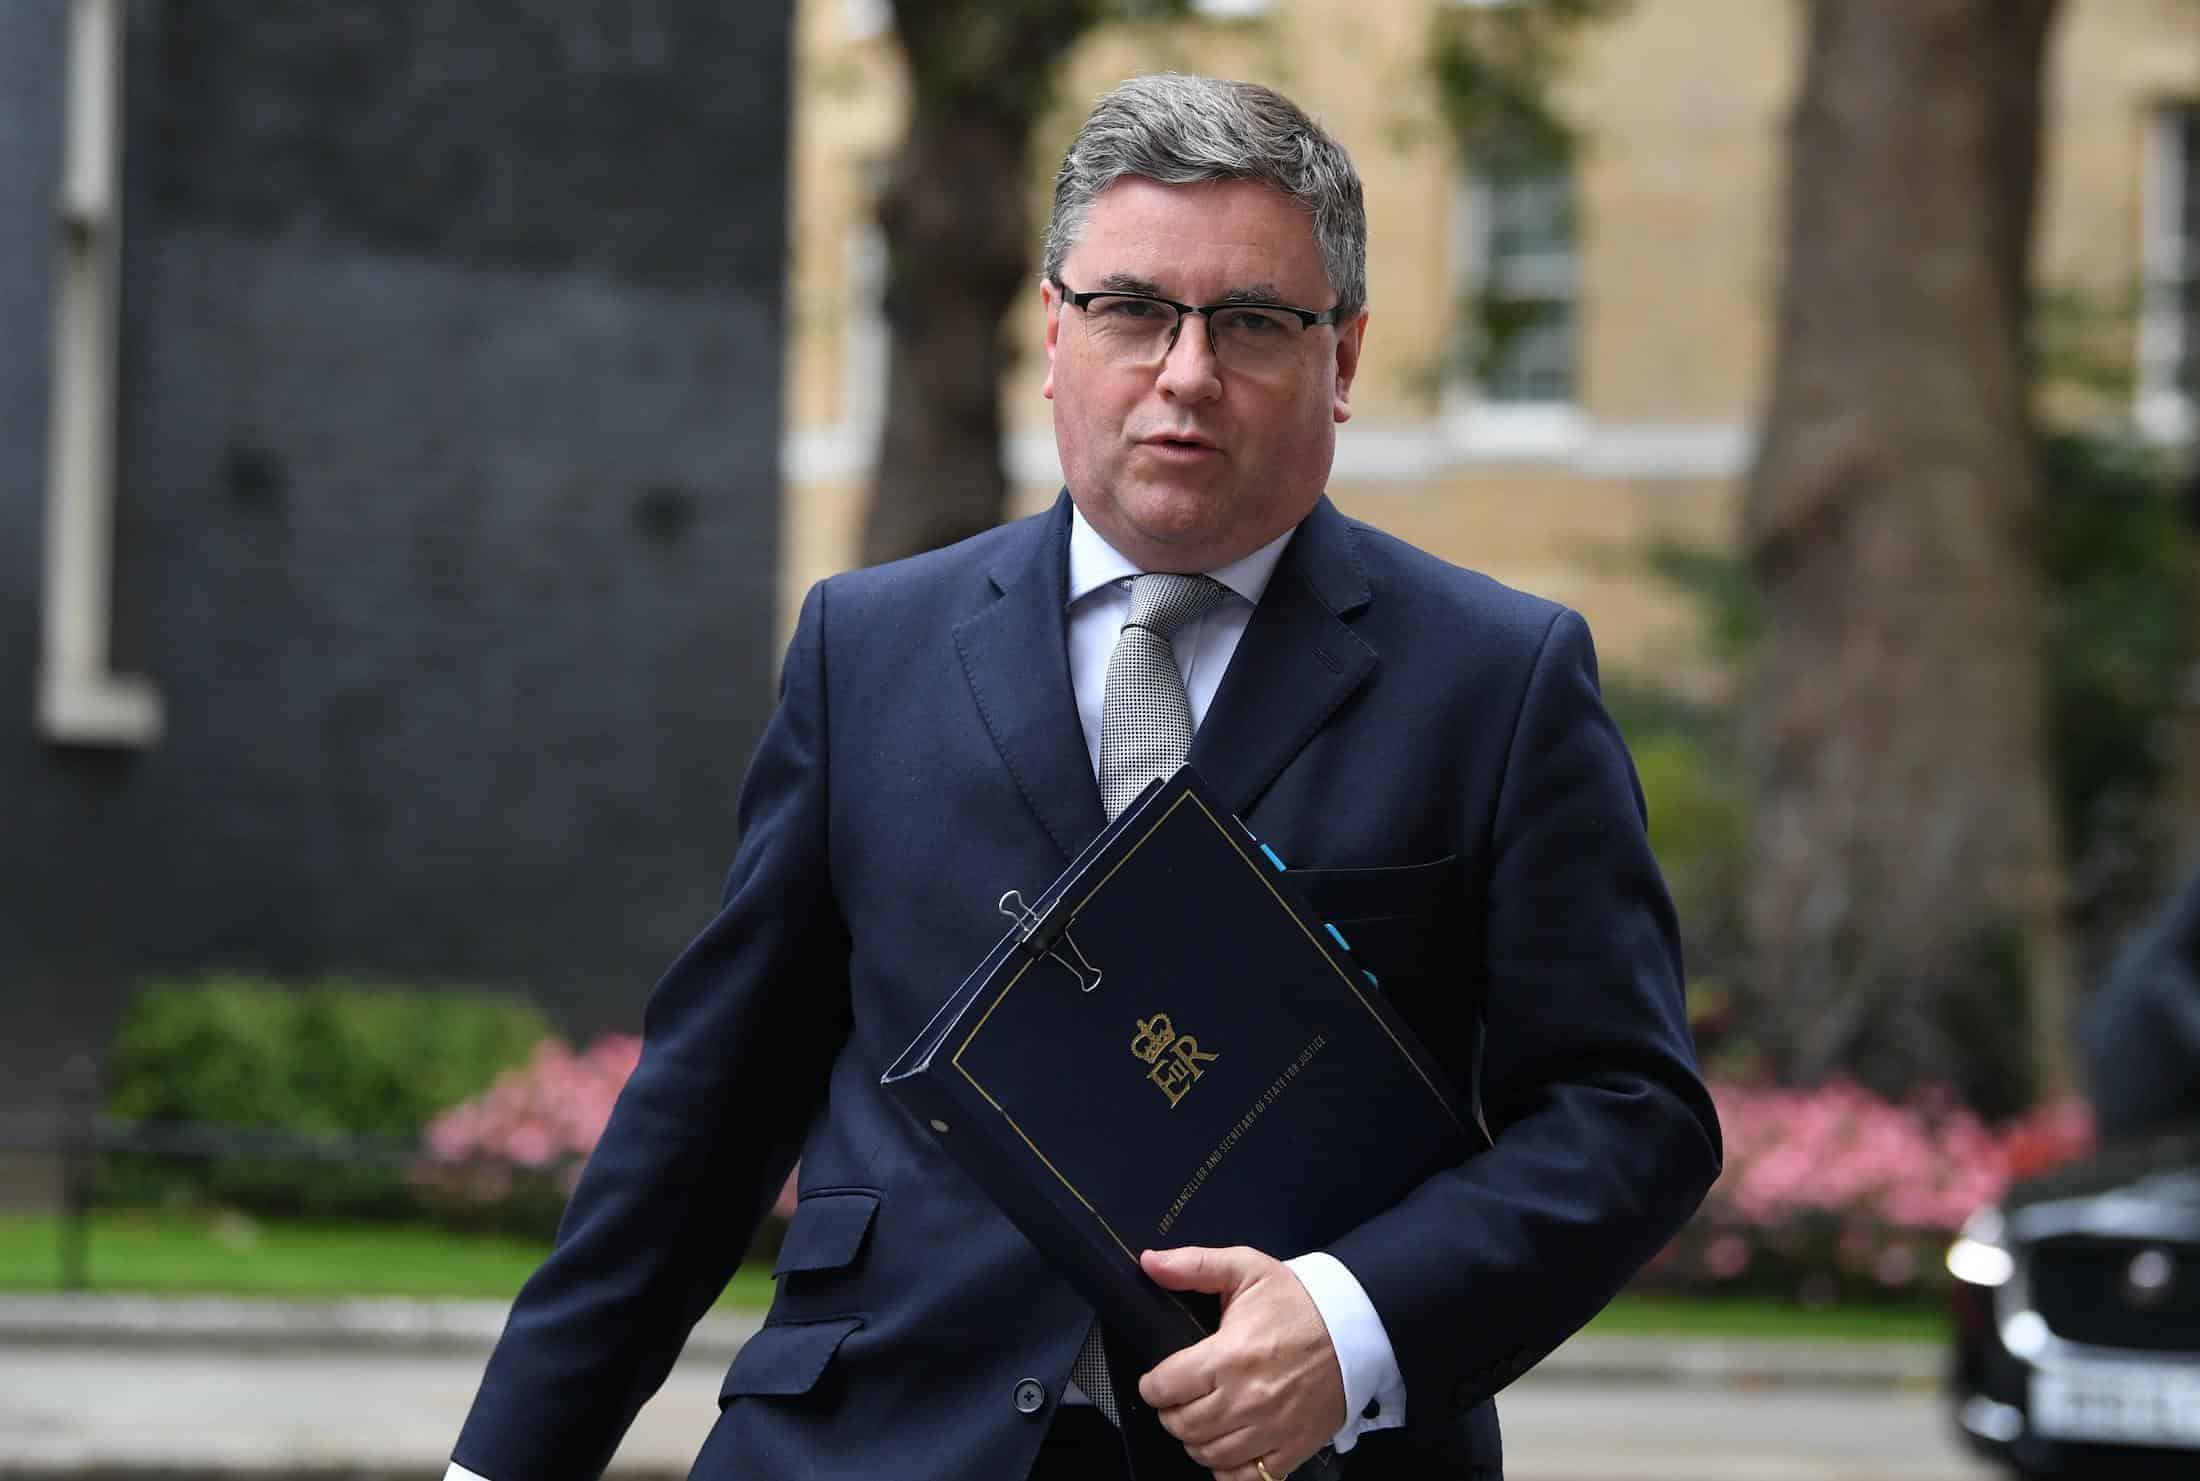 Video – Justice Secretary has “no qualms” with Govt plans to override Brexit divorce deal